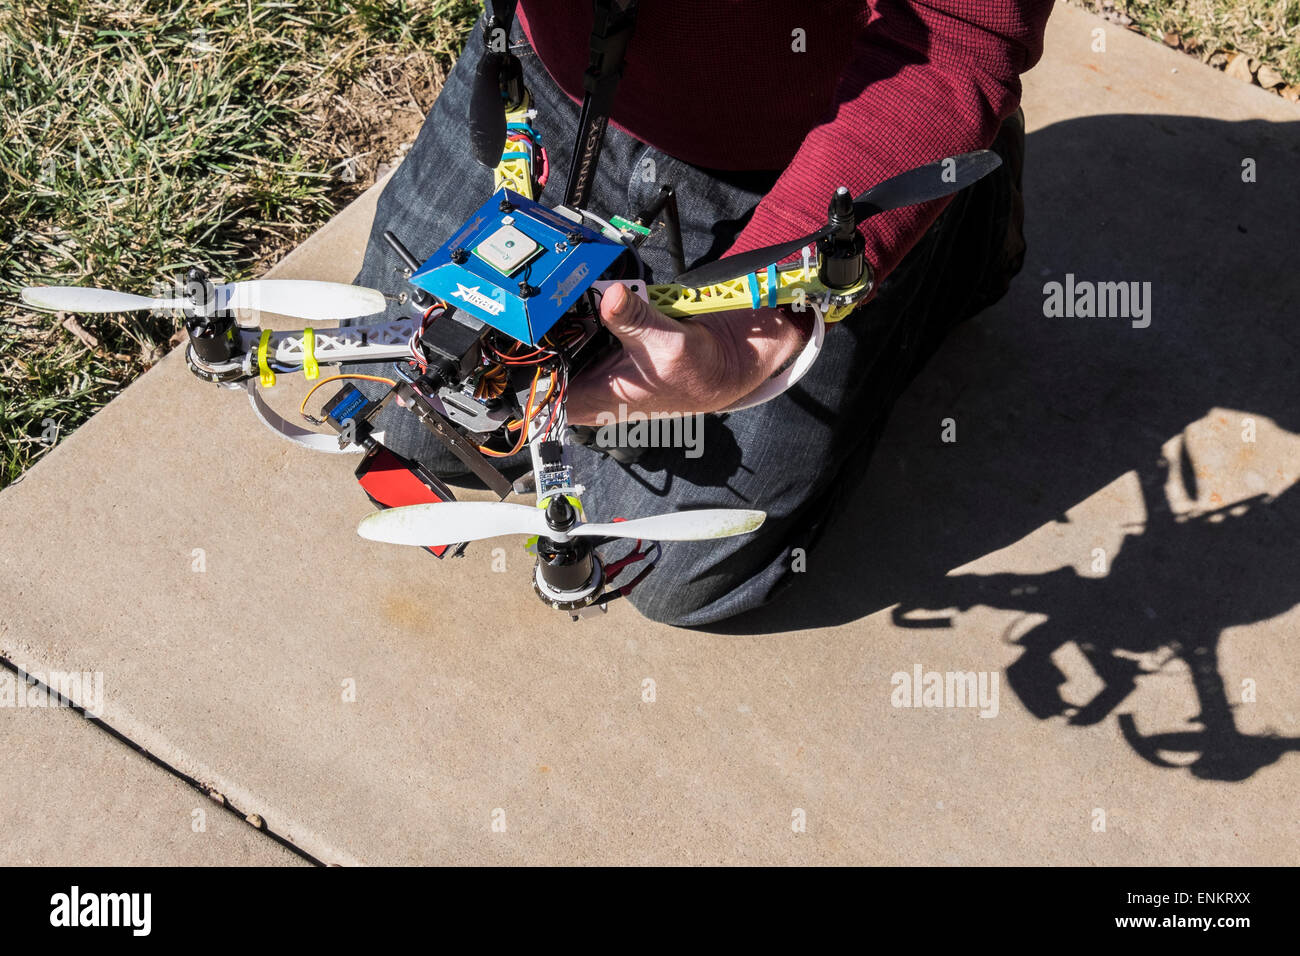 A man kneels on a sidewalk and holds his DIY project quad copter drone. Stock Photo